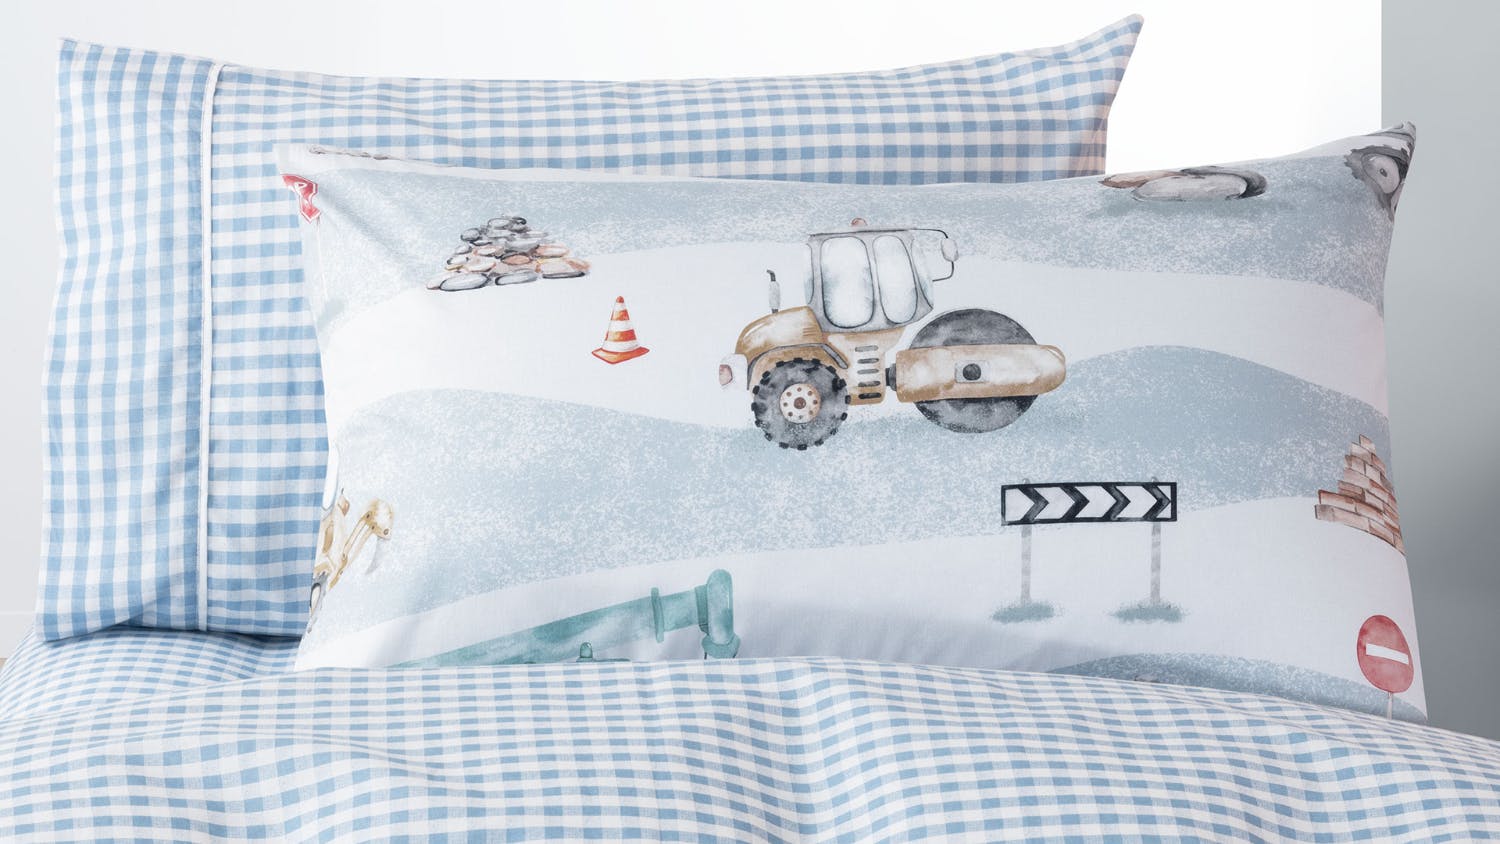 Heavy Machinery Duvet Cover Set by Squiggles